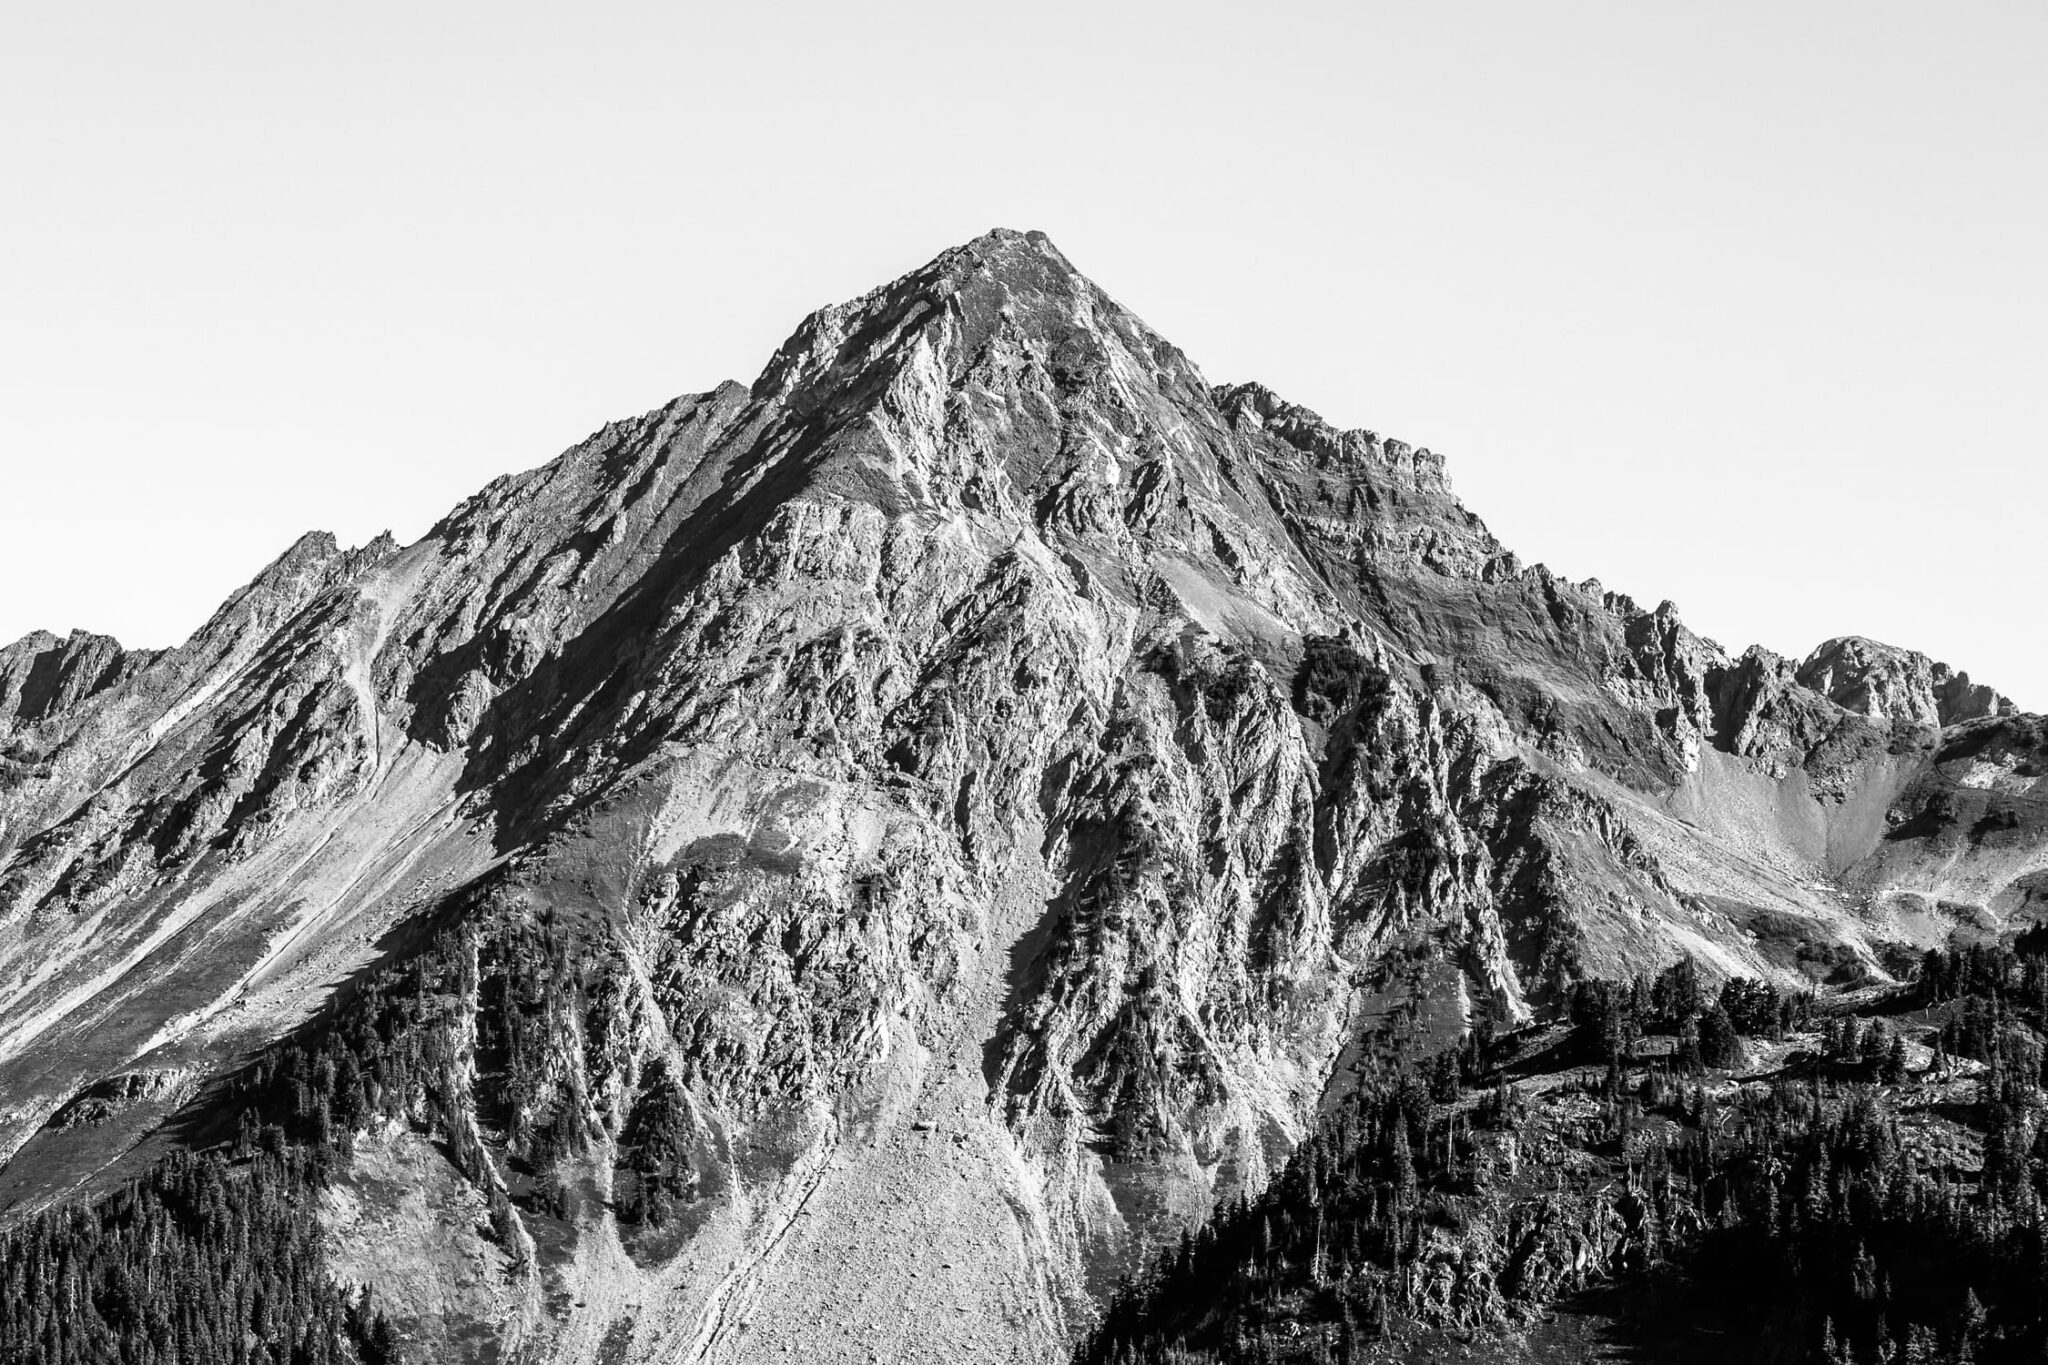 A black and white landscape photograph of Mount Larrabee in the North Cascades of Washington State as viewed from Gold Run Pass.